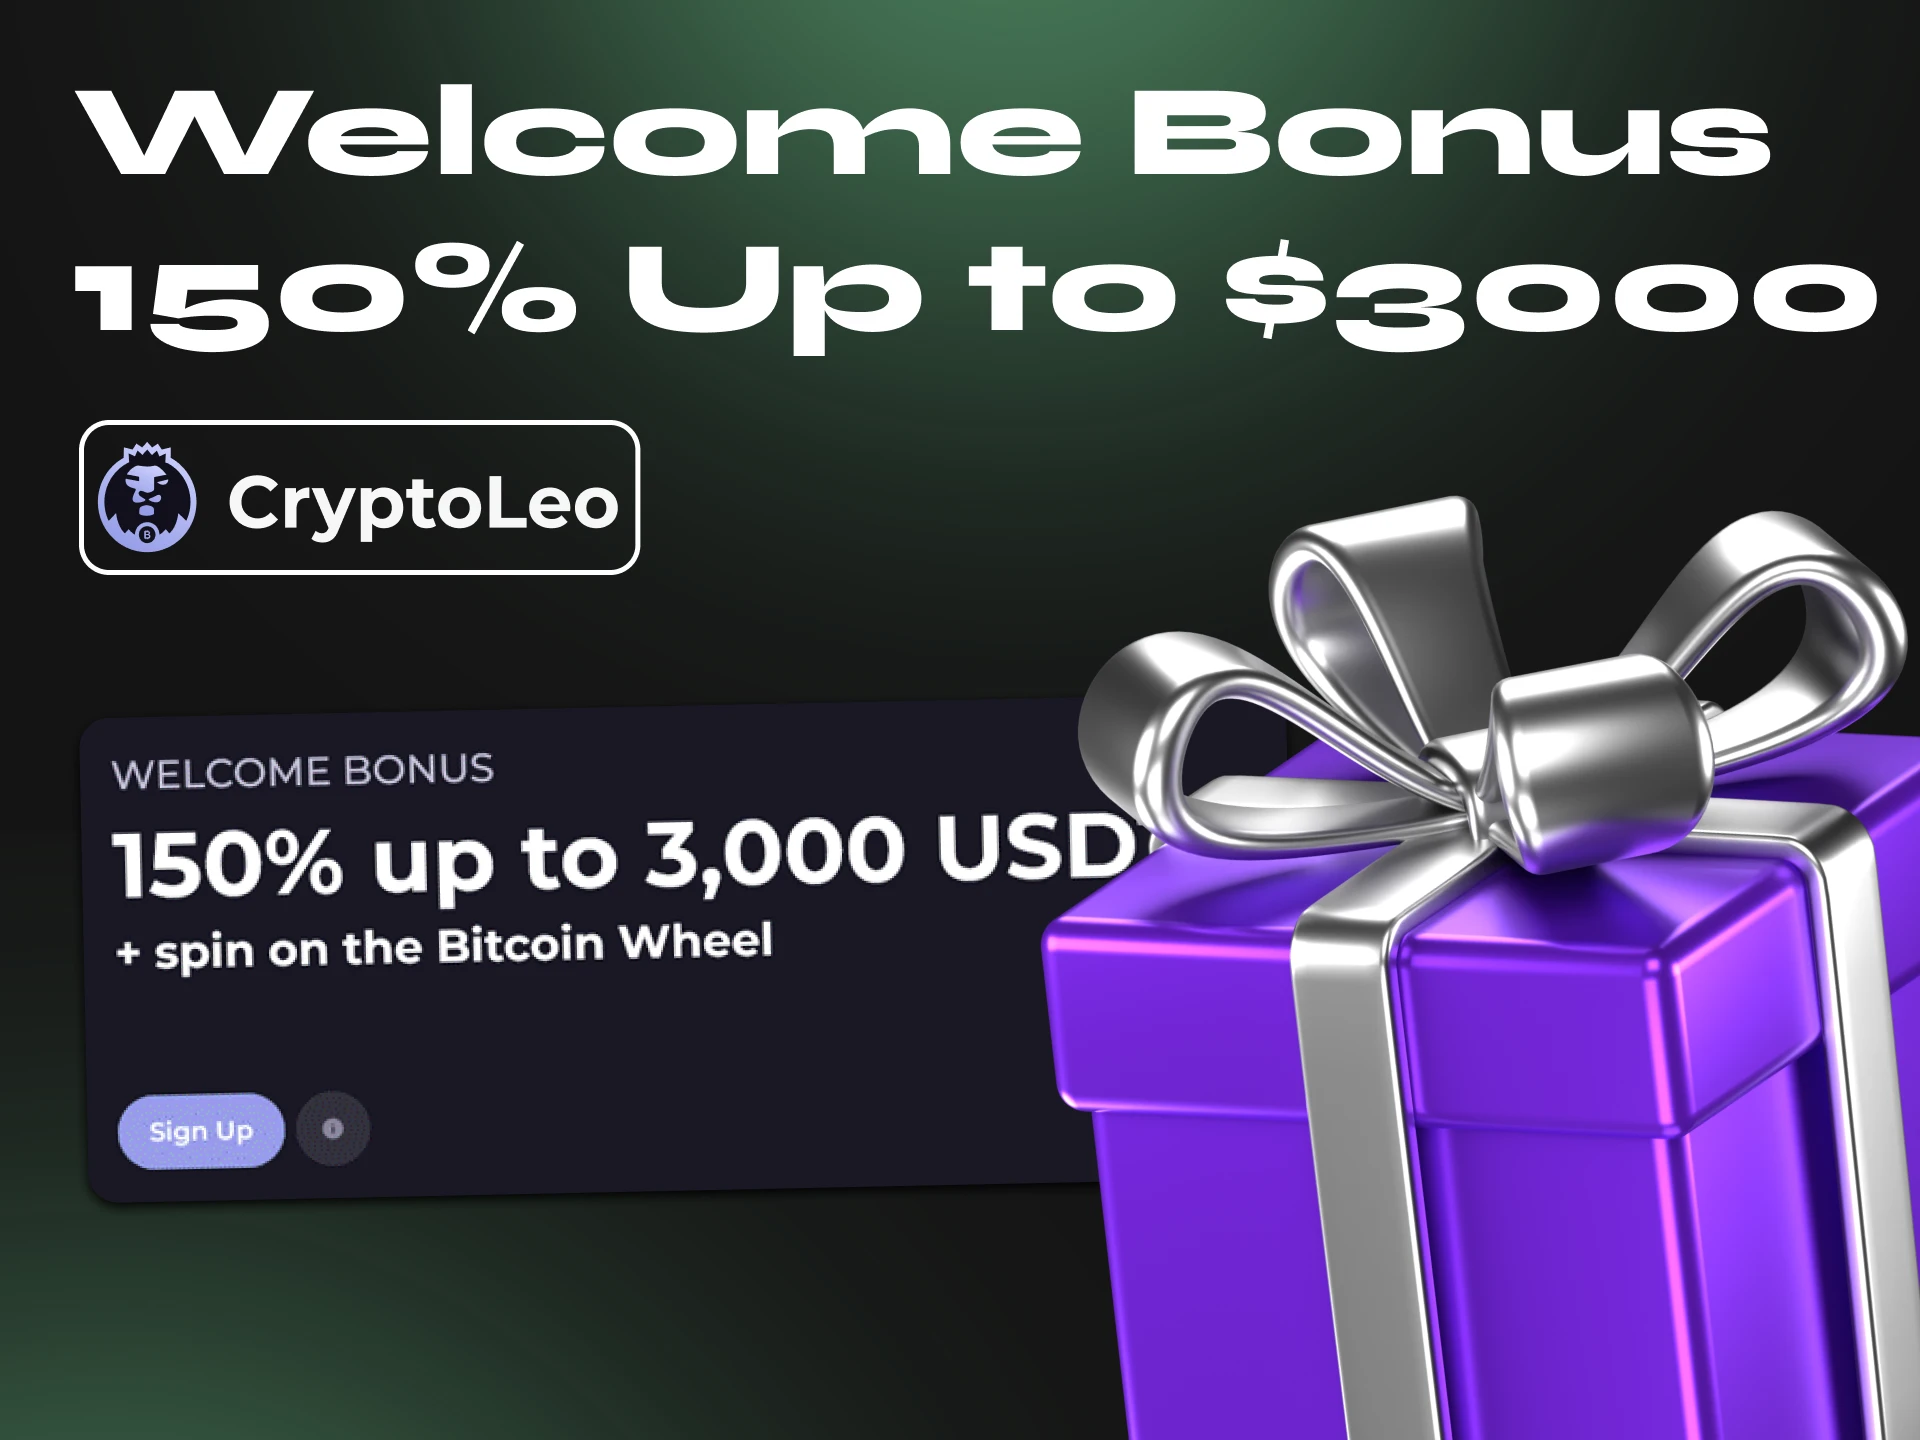 Cryptoleo offers a welcome bonus suitable for poker games.